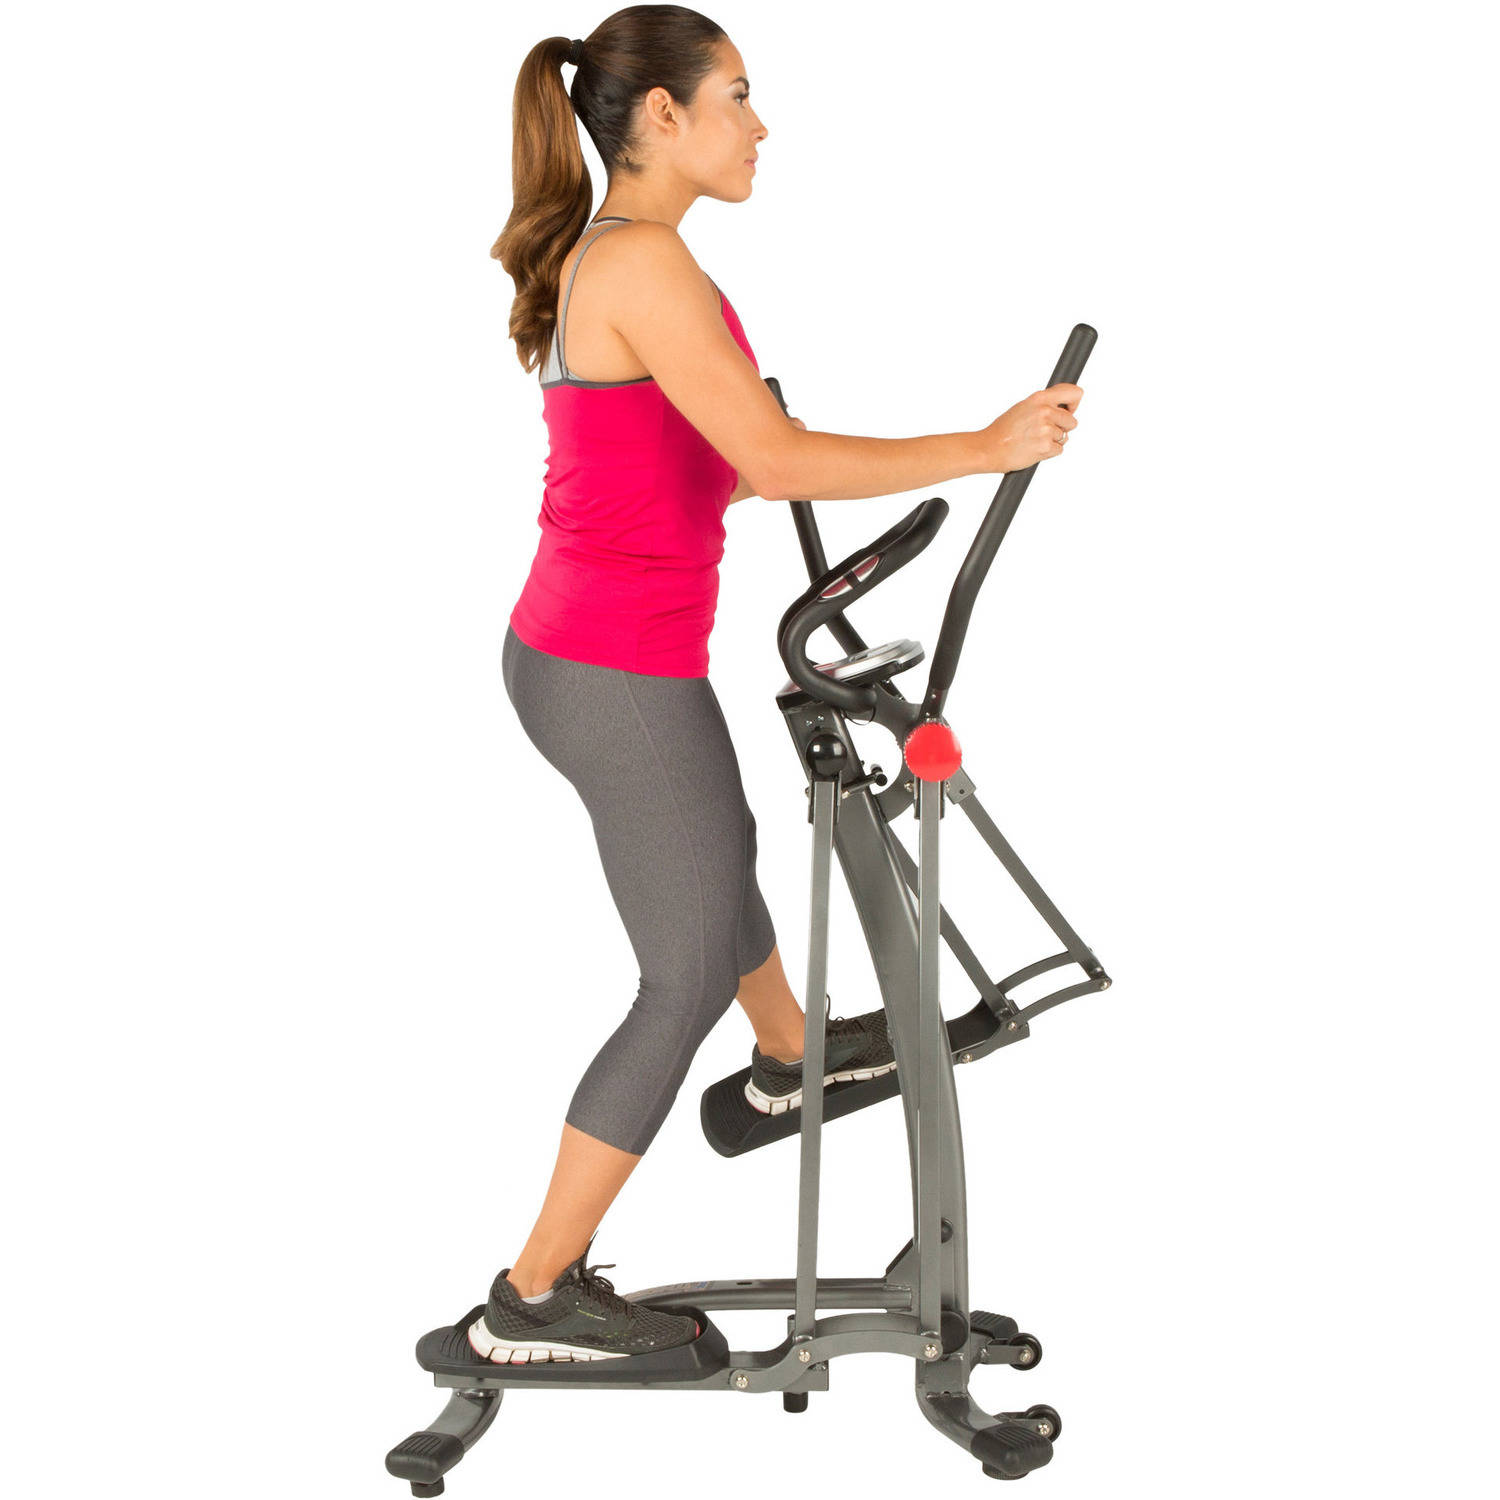 Fitness Reality Multi-Direction Elliptical Cloud Walker X1 with Pulse Sensors - image 31 of 31